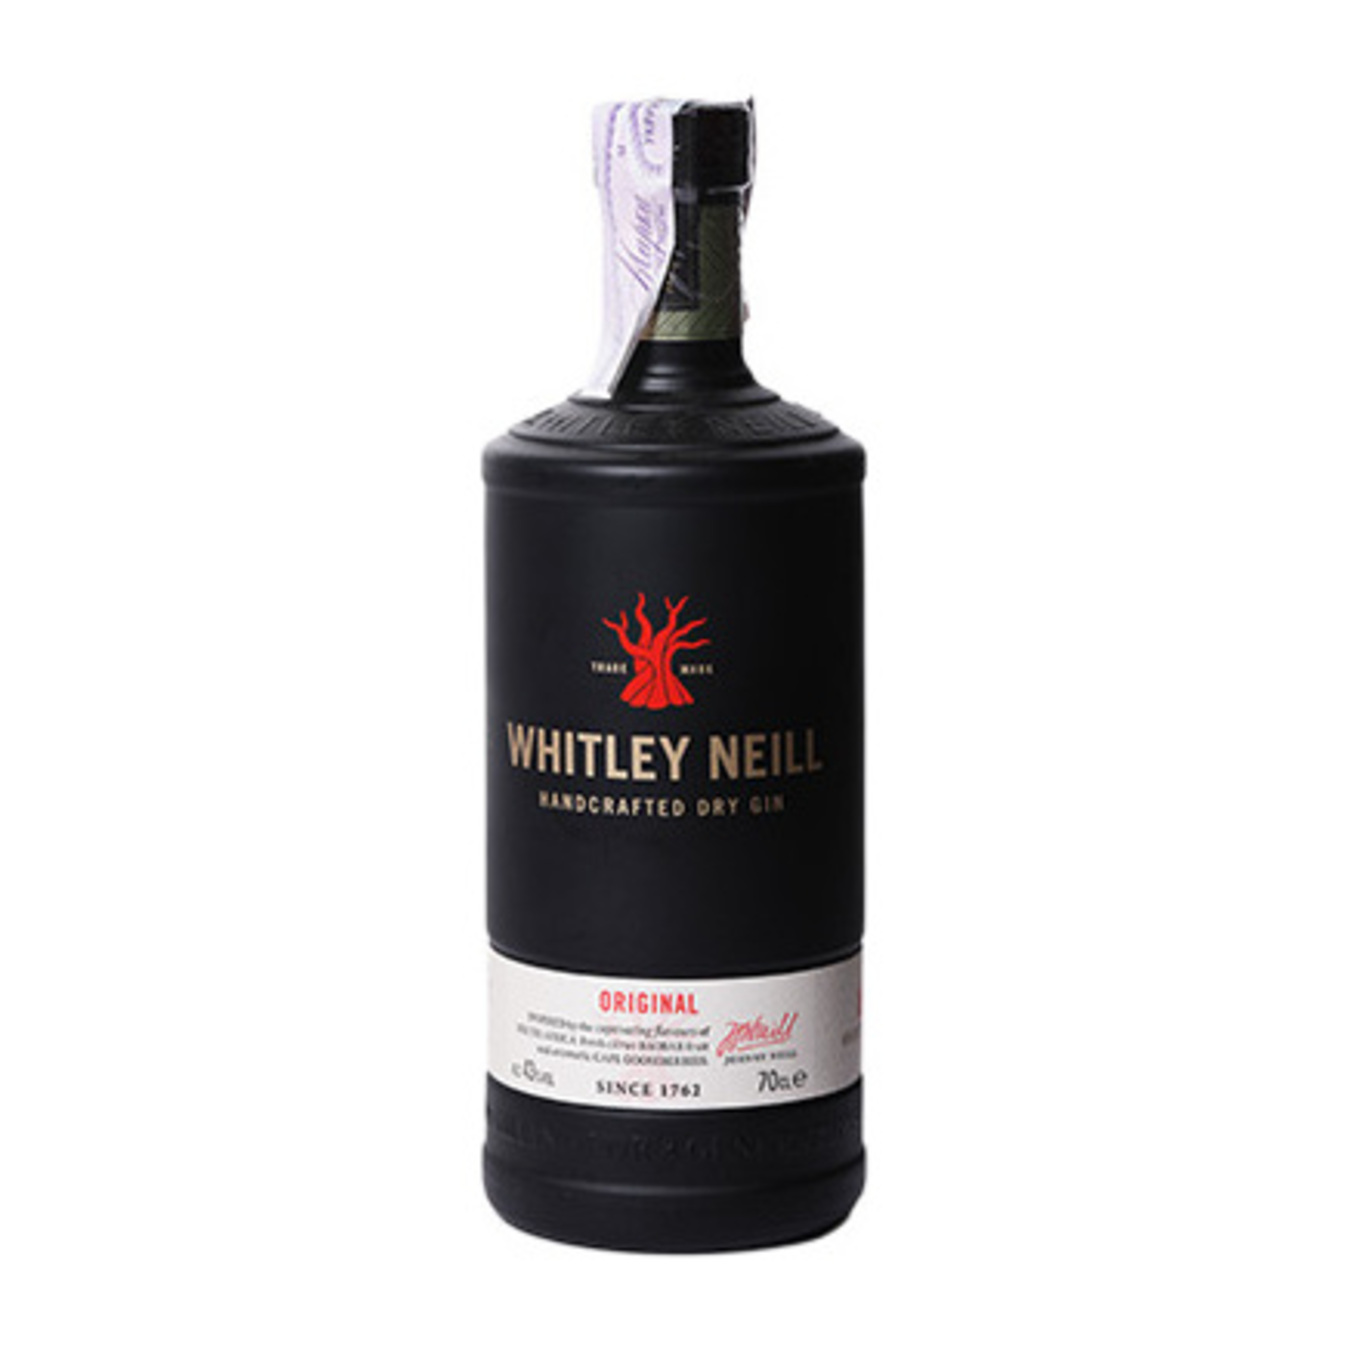 Whitley Neill gin 43% 0.7l